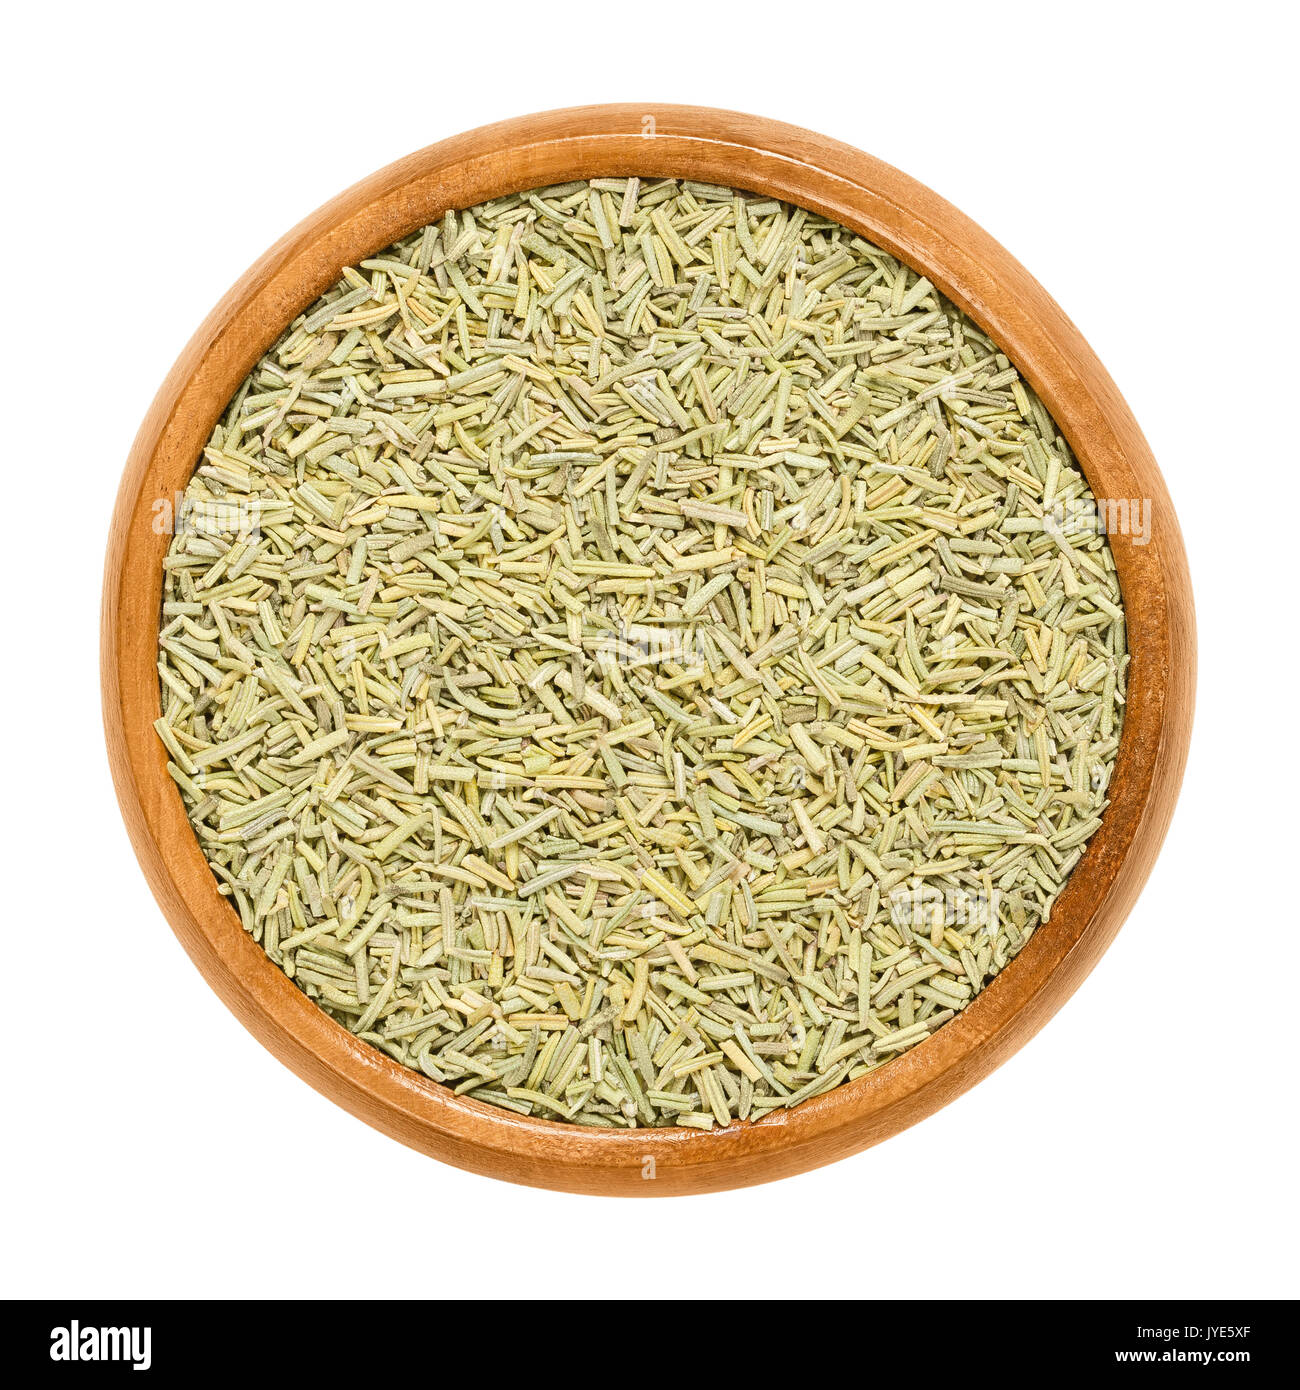 Rosemary dried in wooden bowl. Sliced needle like leaves of Rosmarinus officinalis. Herb with aromatic olive green leaves and a bitter taste. Stock Photo